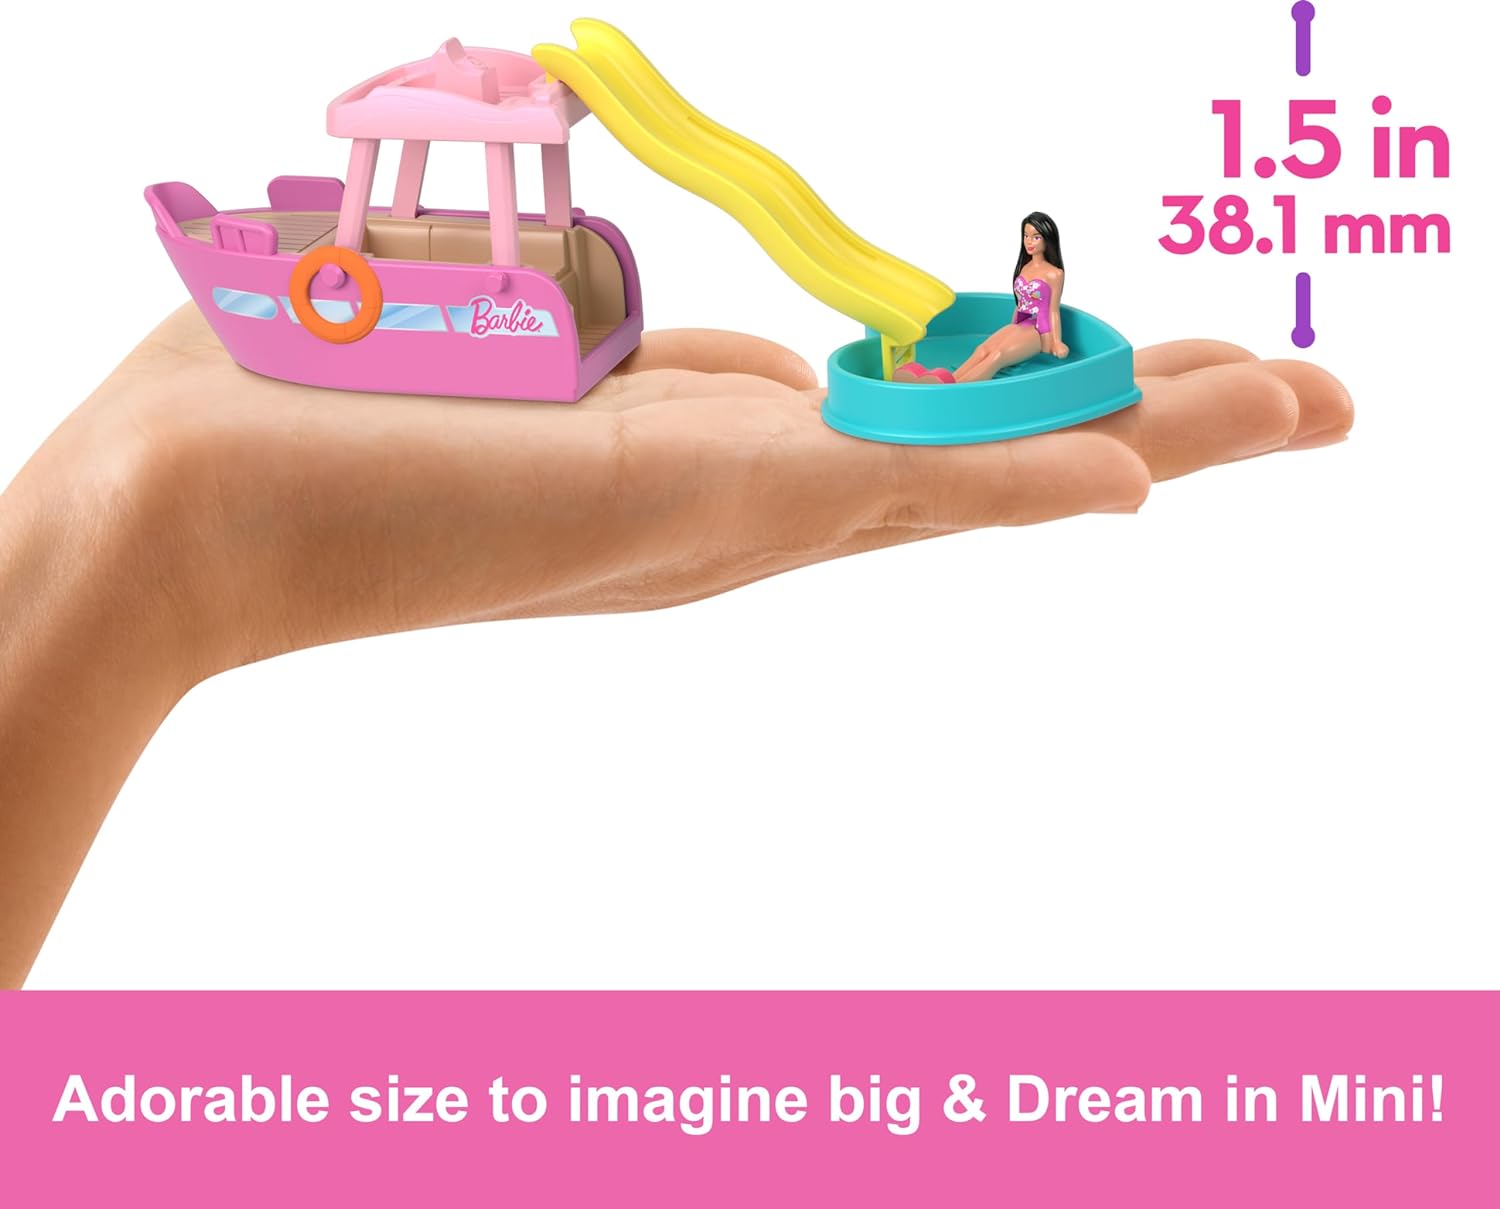 Barbie Mini BarbieLand Doll & Toy Vehicle Sets, 1.5-inch Doll & Dream Boat with Color-Change Surprise